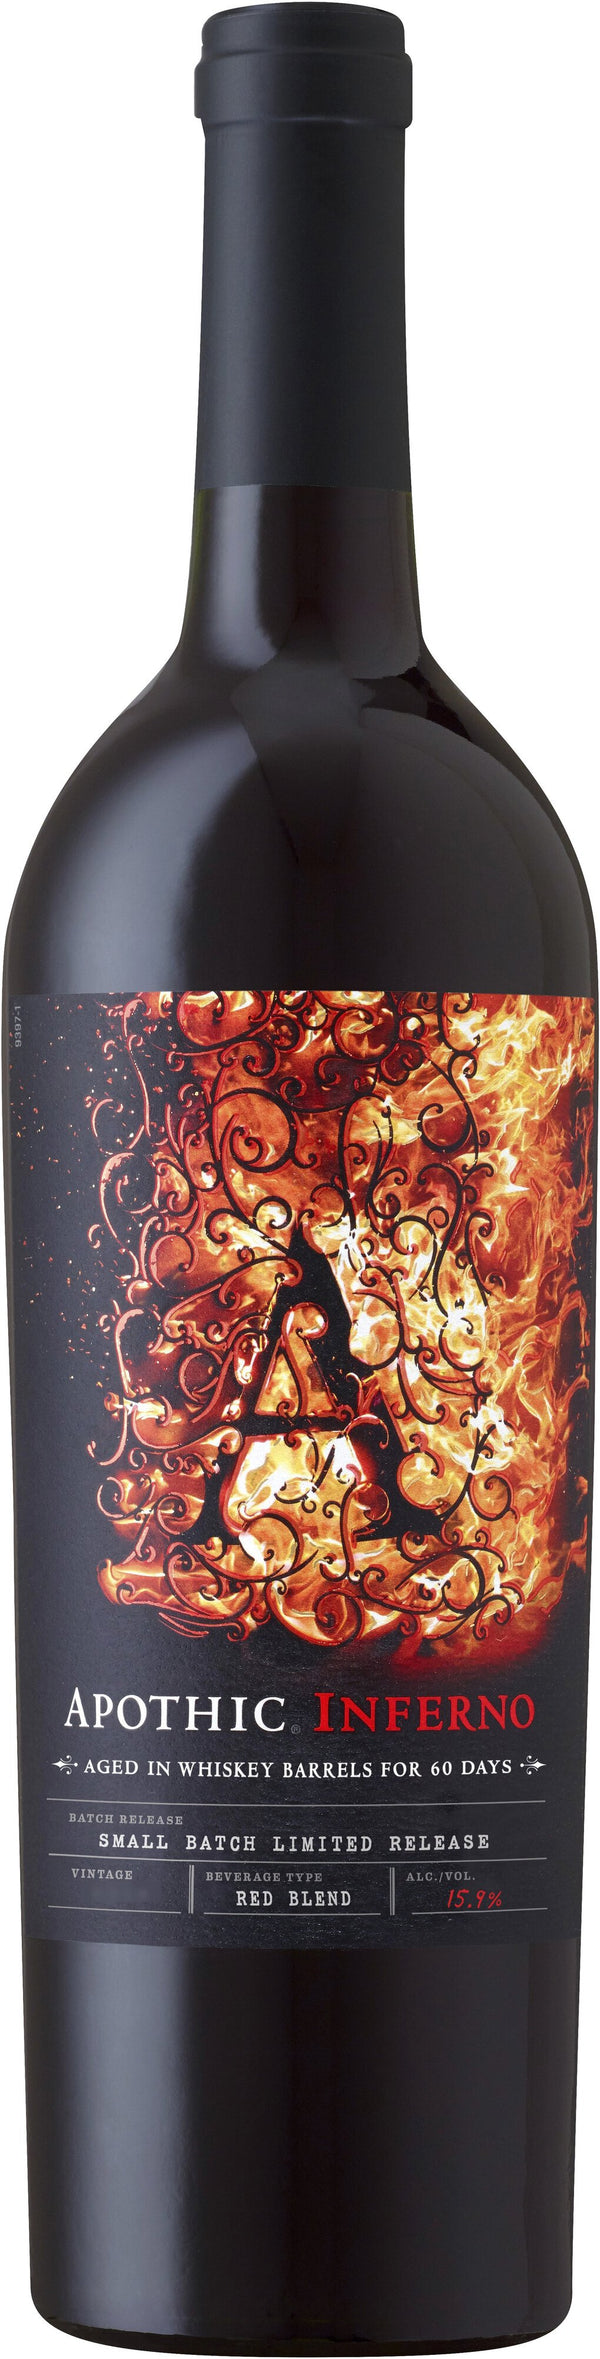 Apothic Inferno Red Blend 750ml